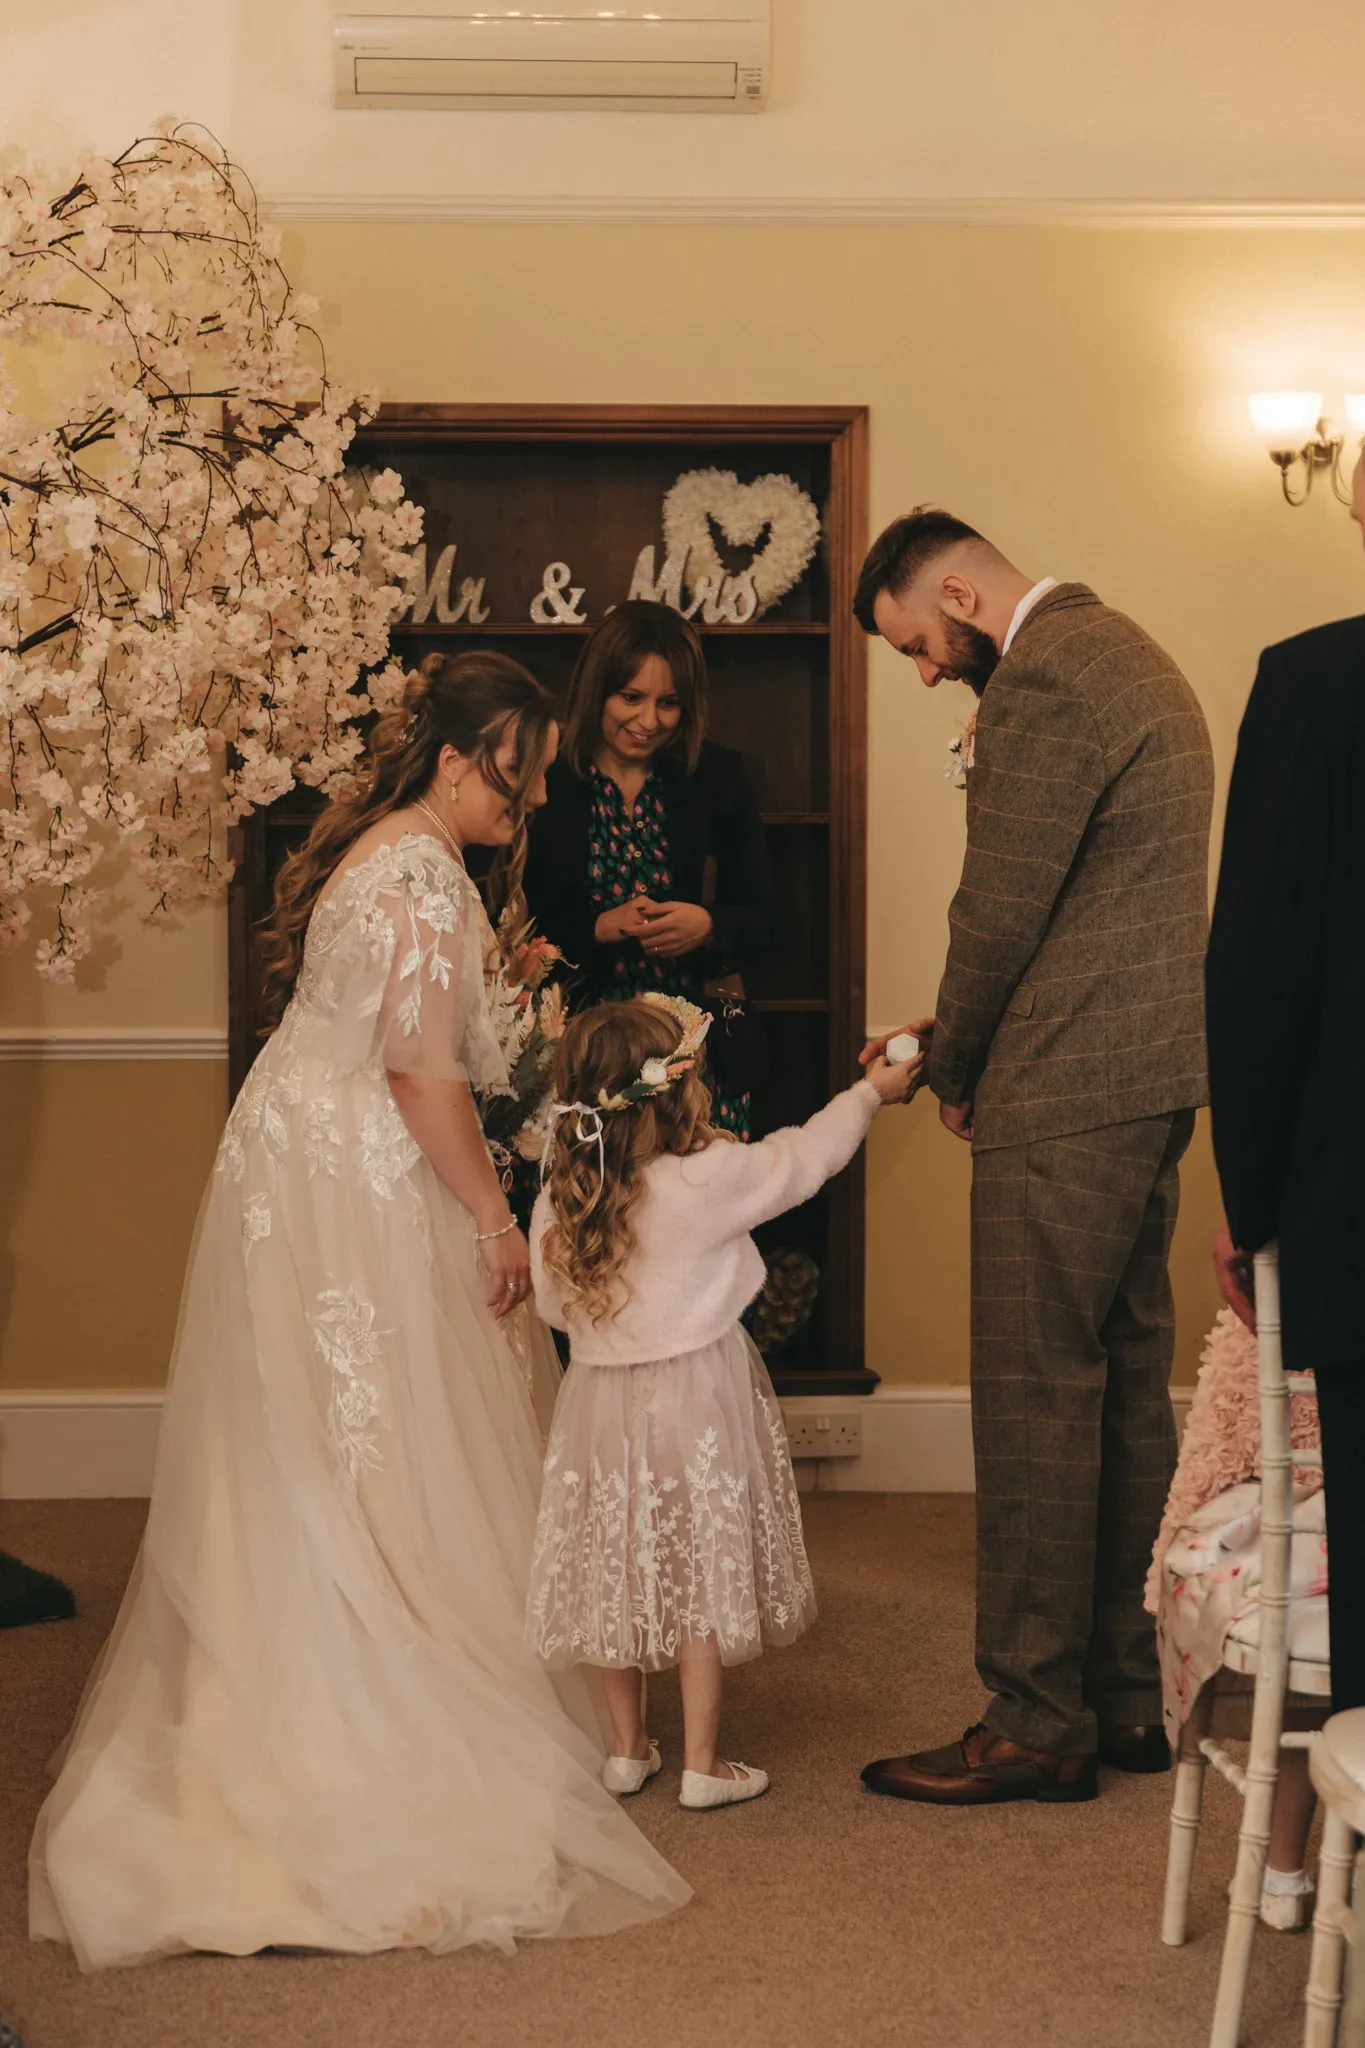 A bride in an embroidered gown hands a flower to a young girl, while a groom and another woman watch. they are in a warmly lit room decorated for a wedding, with a "mr. & mrs." sign on the door.